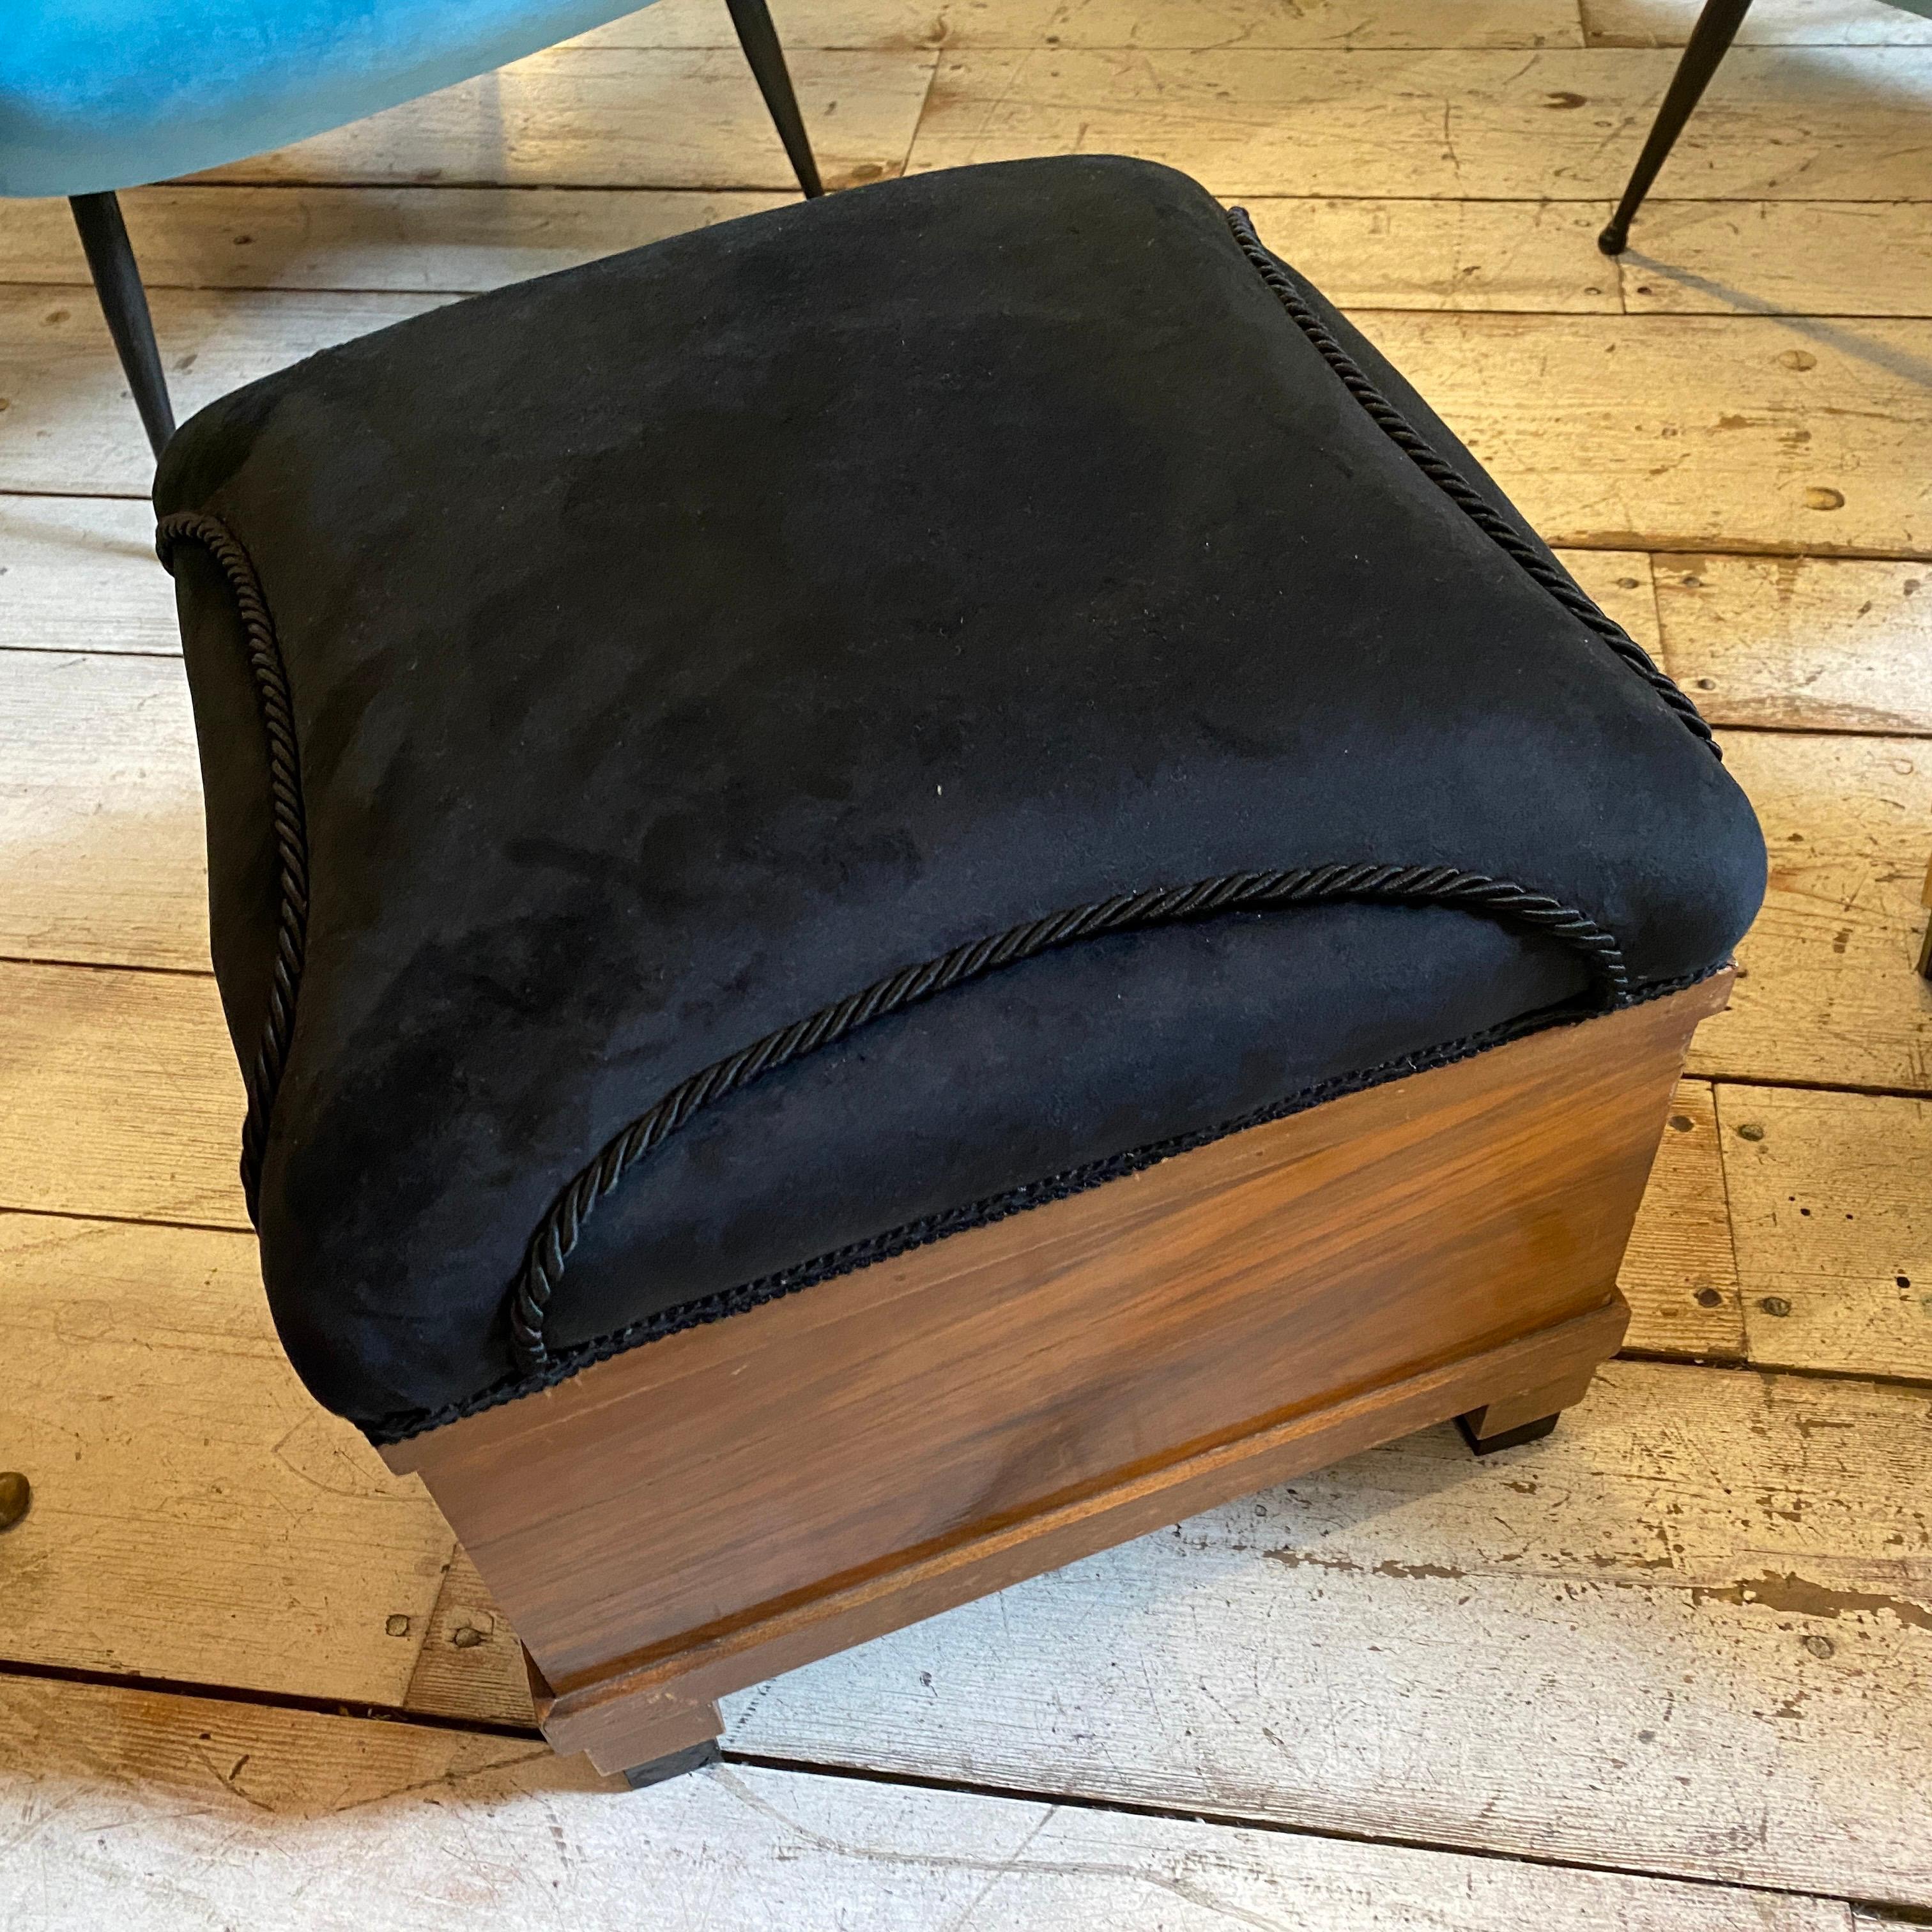 Two amazing Art Deco poufs made in Italy in the thirties, wood is in original conditions, they have been recently upholstered in a gorgeous black velvet.